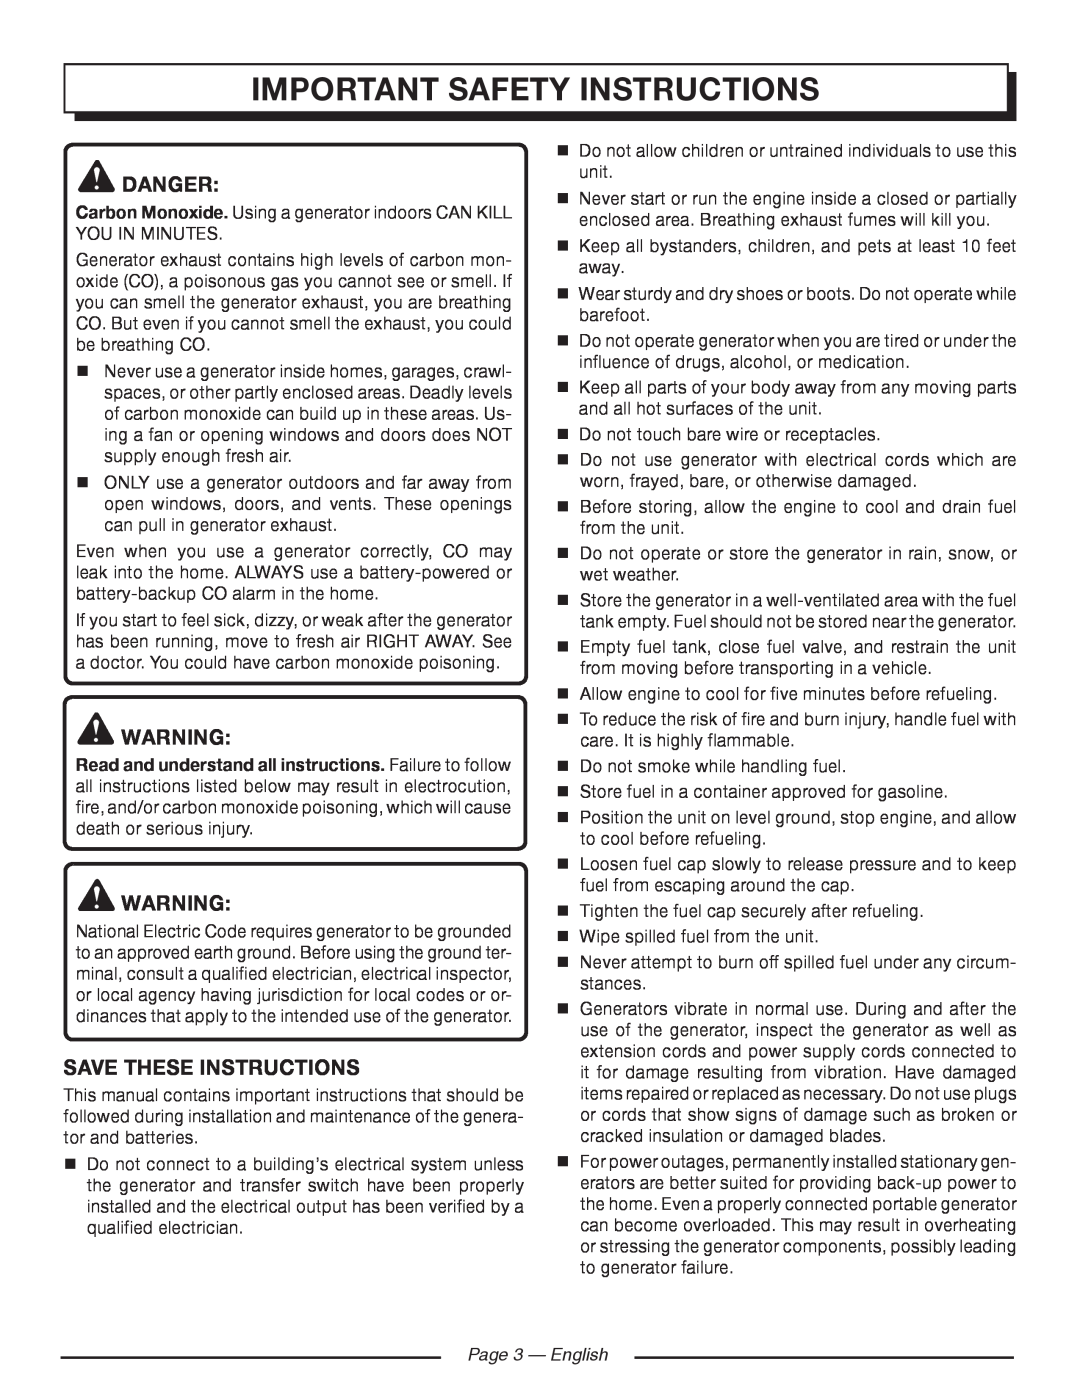 Homelite HGCA5000 manuel dutilisation Important Safety Instructions, Danger, Save These Instructions, Page 3 - English 